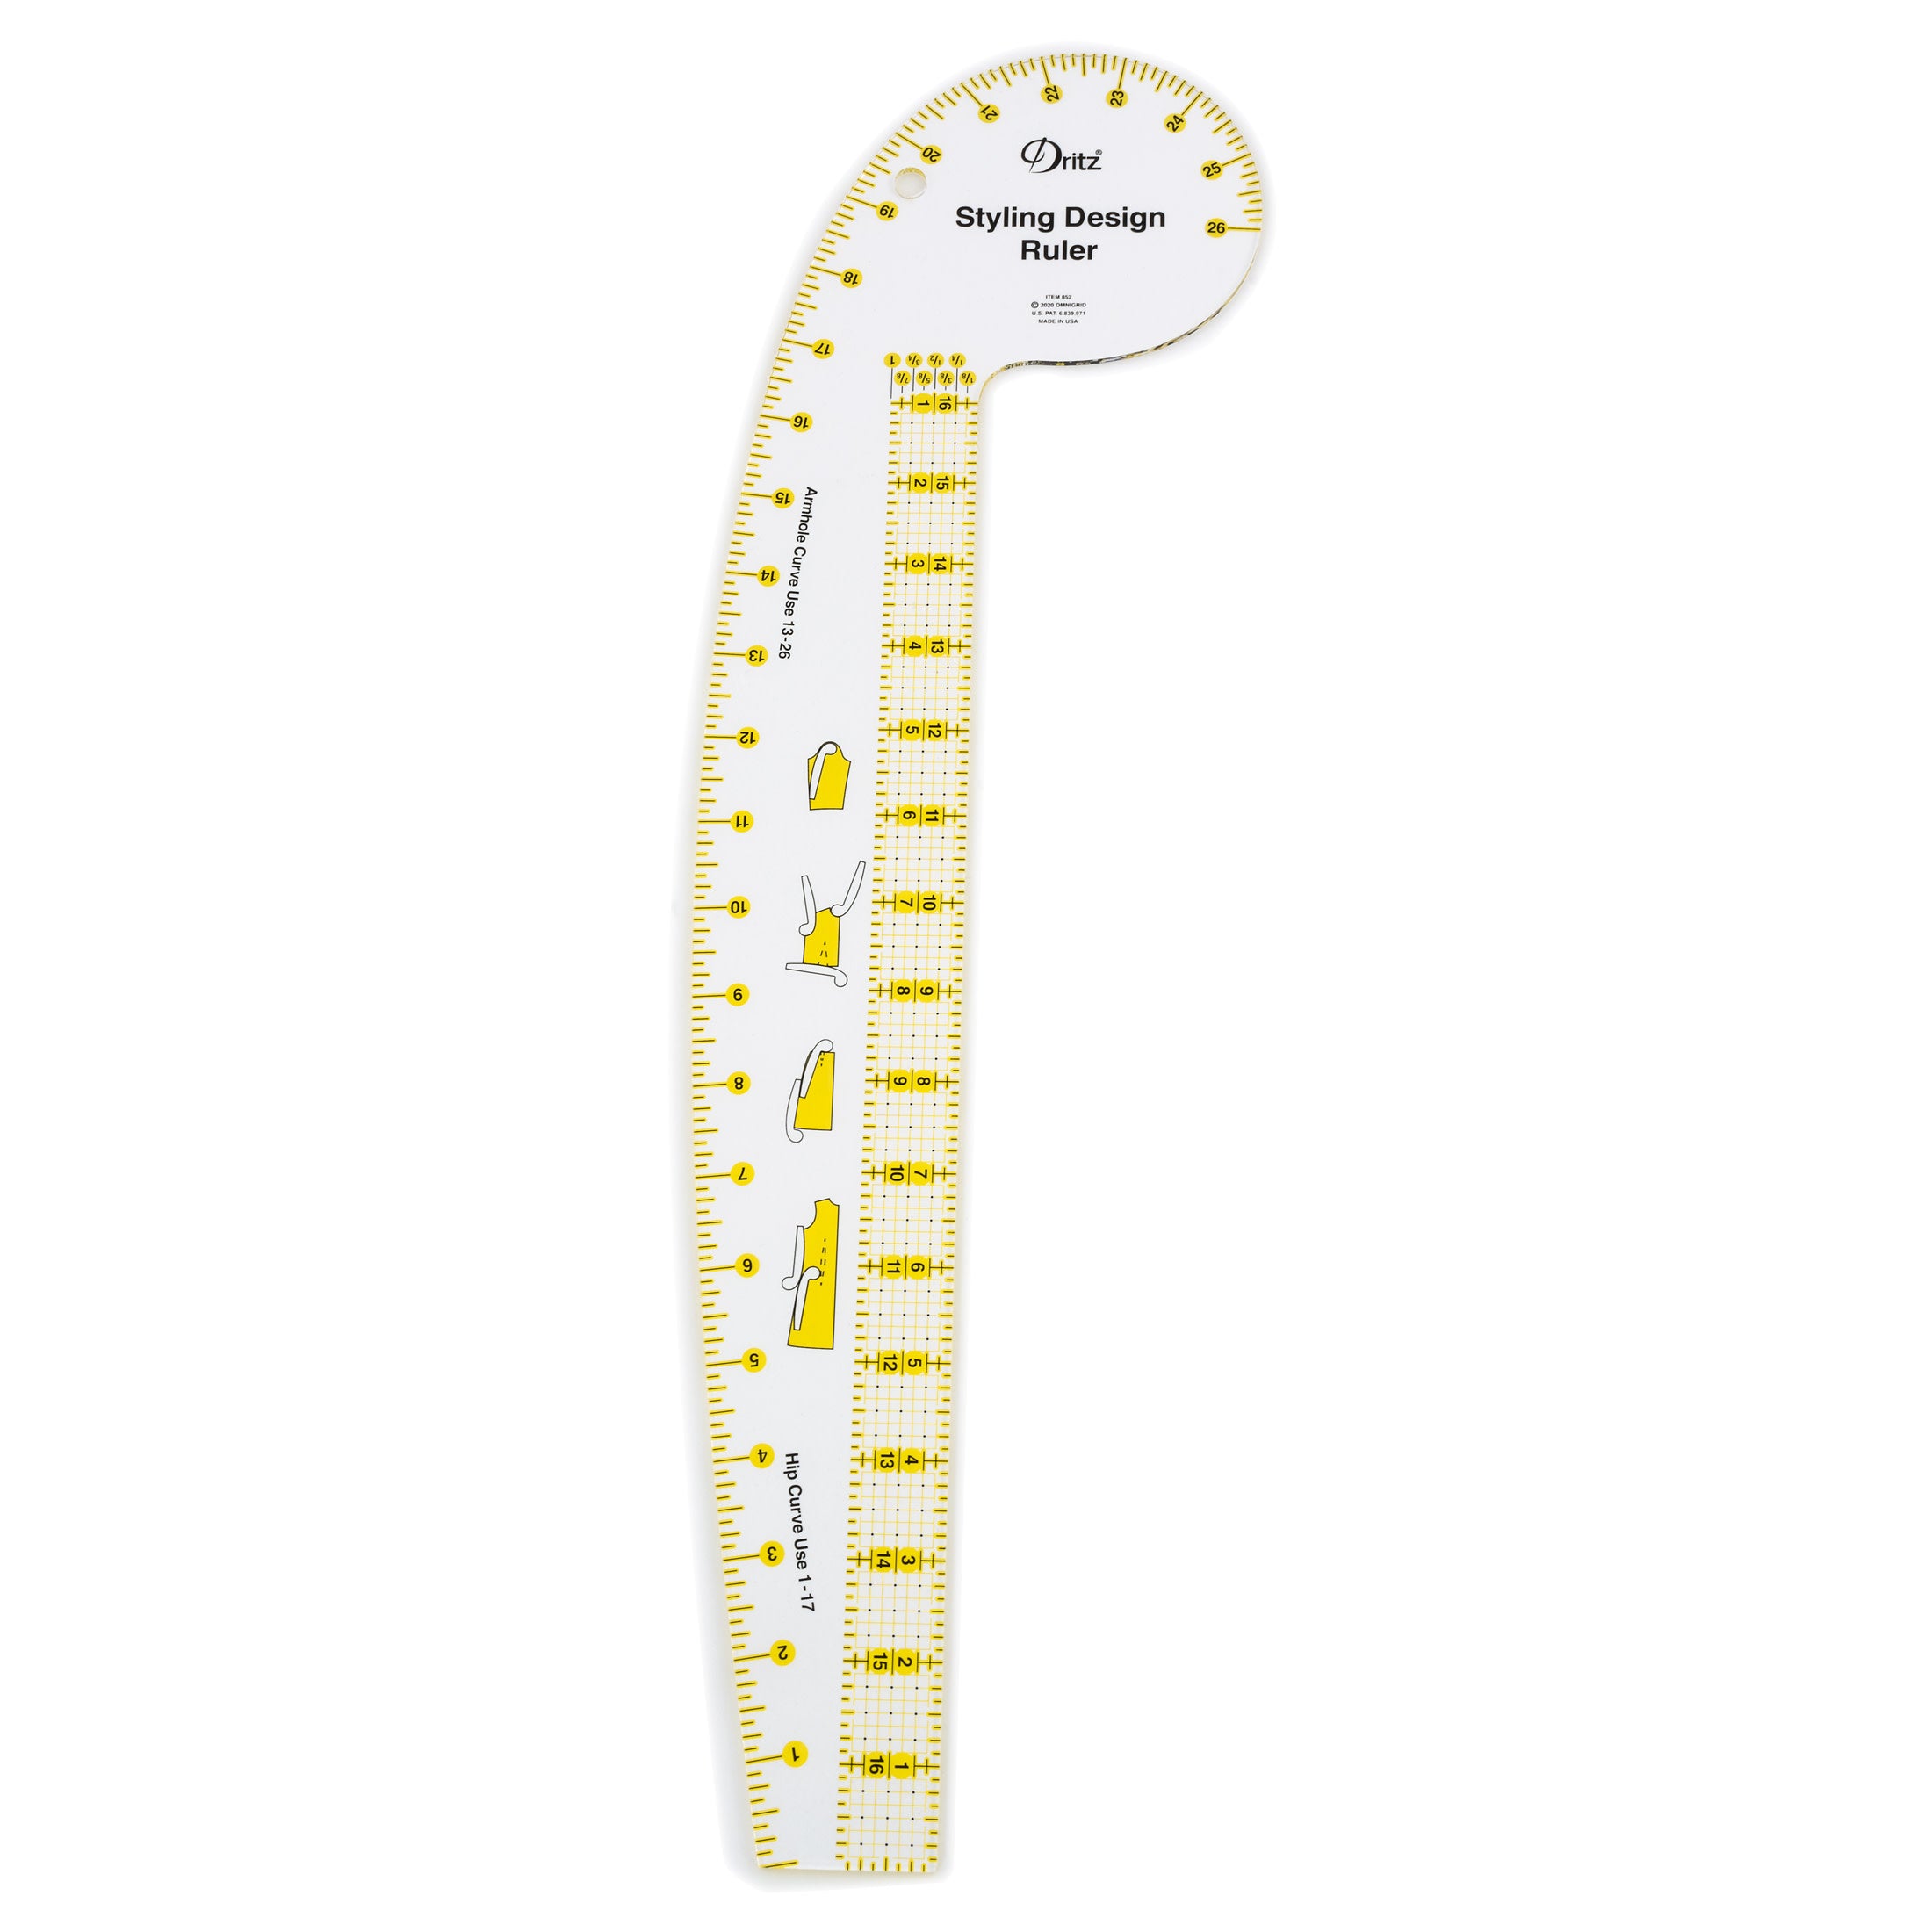 10 Measuring tools & Rulers used in Pattern drafting and Sewing